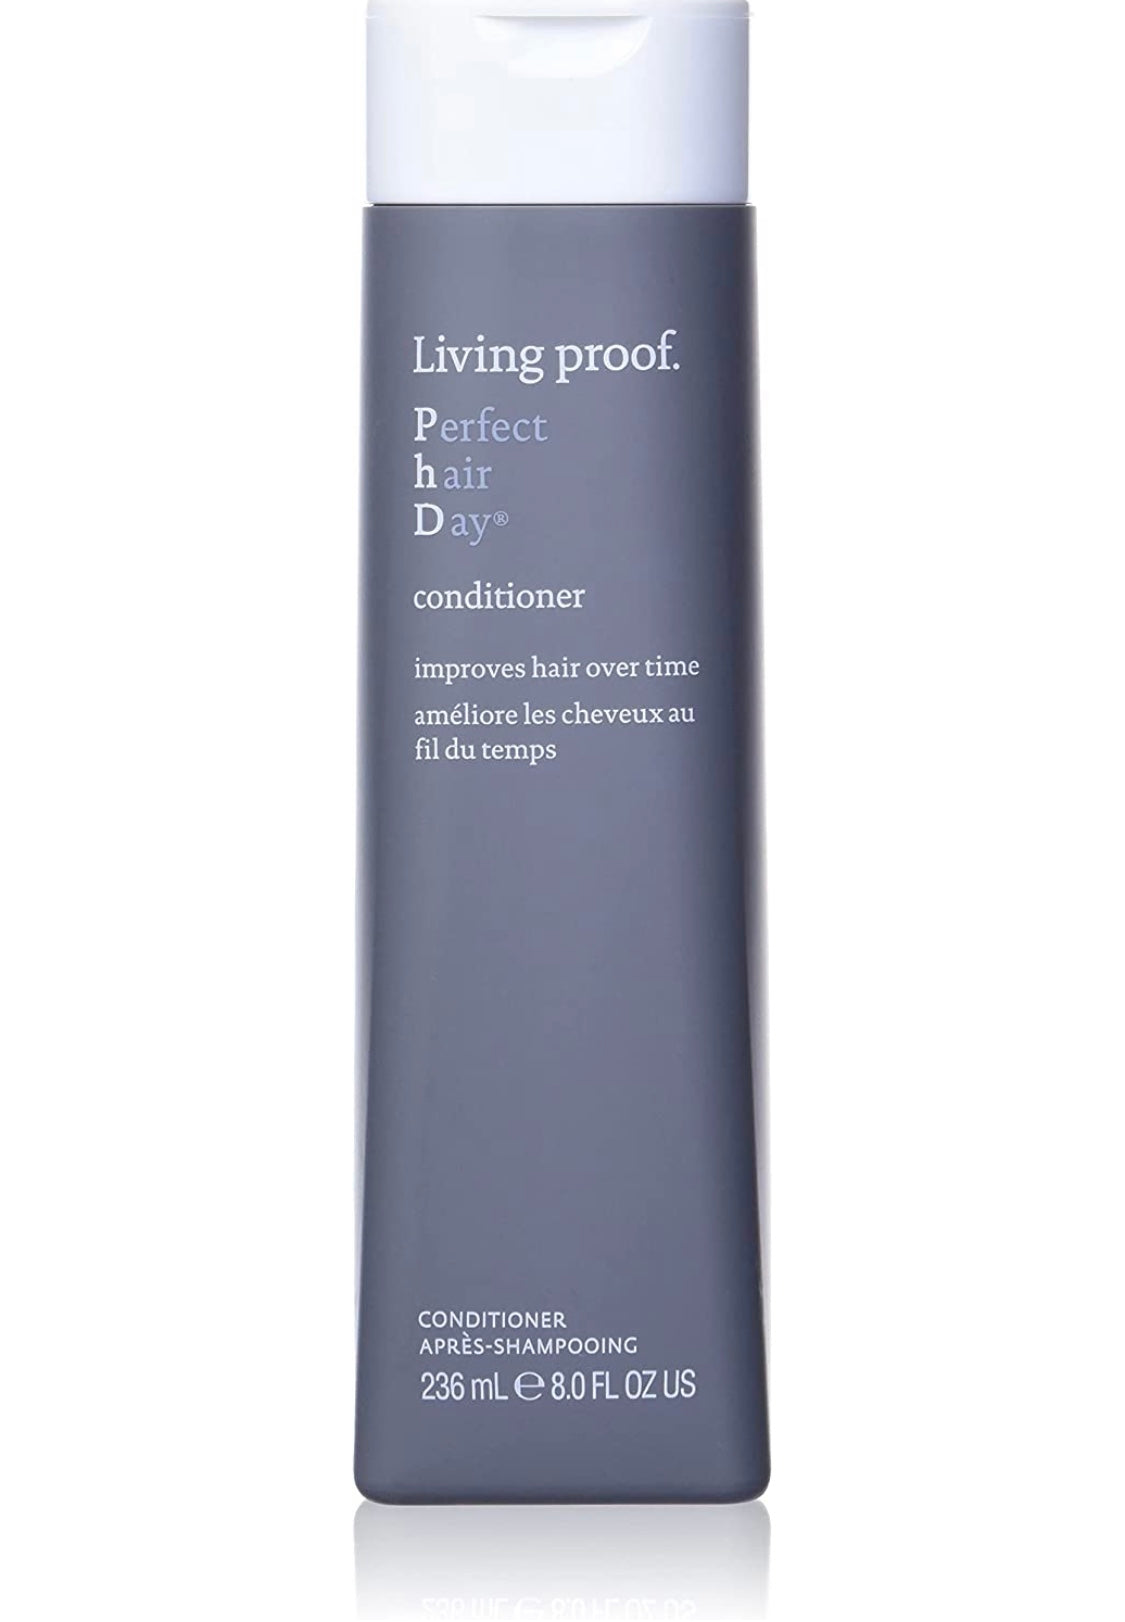 Living proof - Perfect hair day conditioner  8 fl. oz./ 236 ml